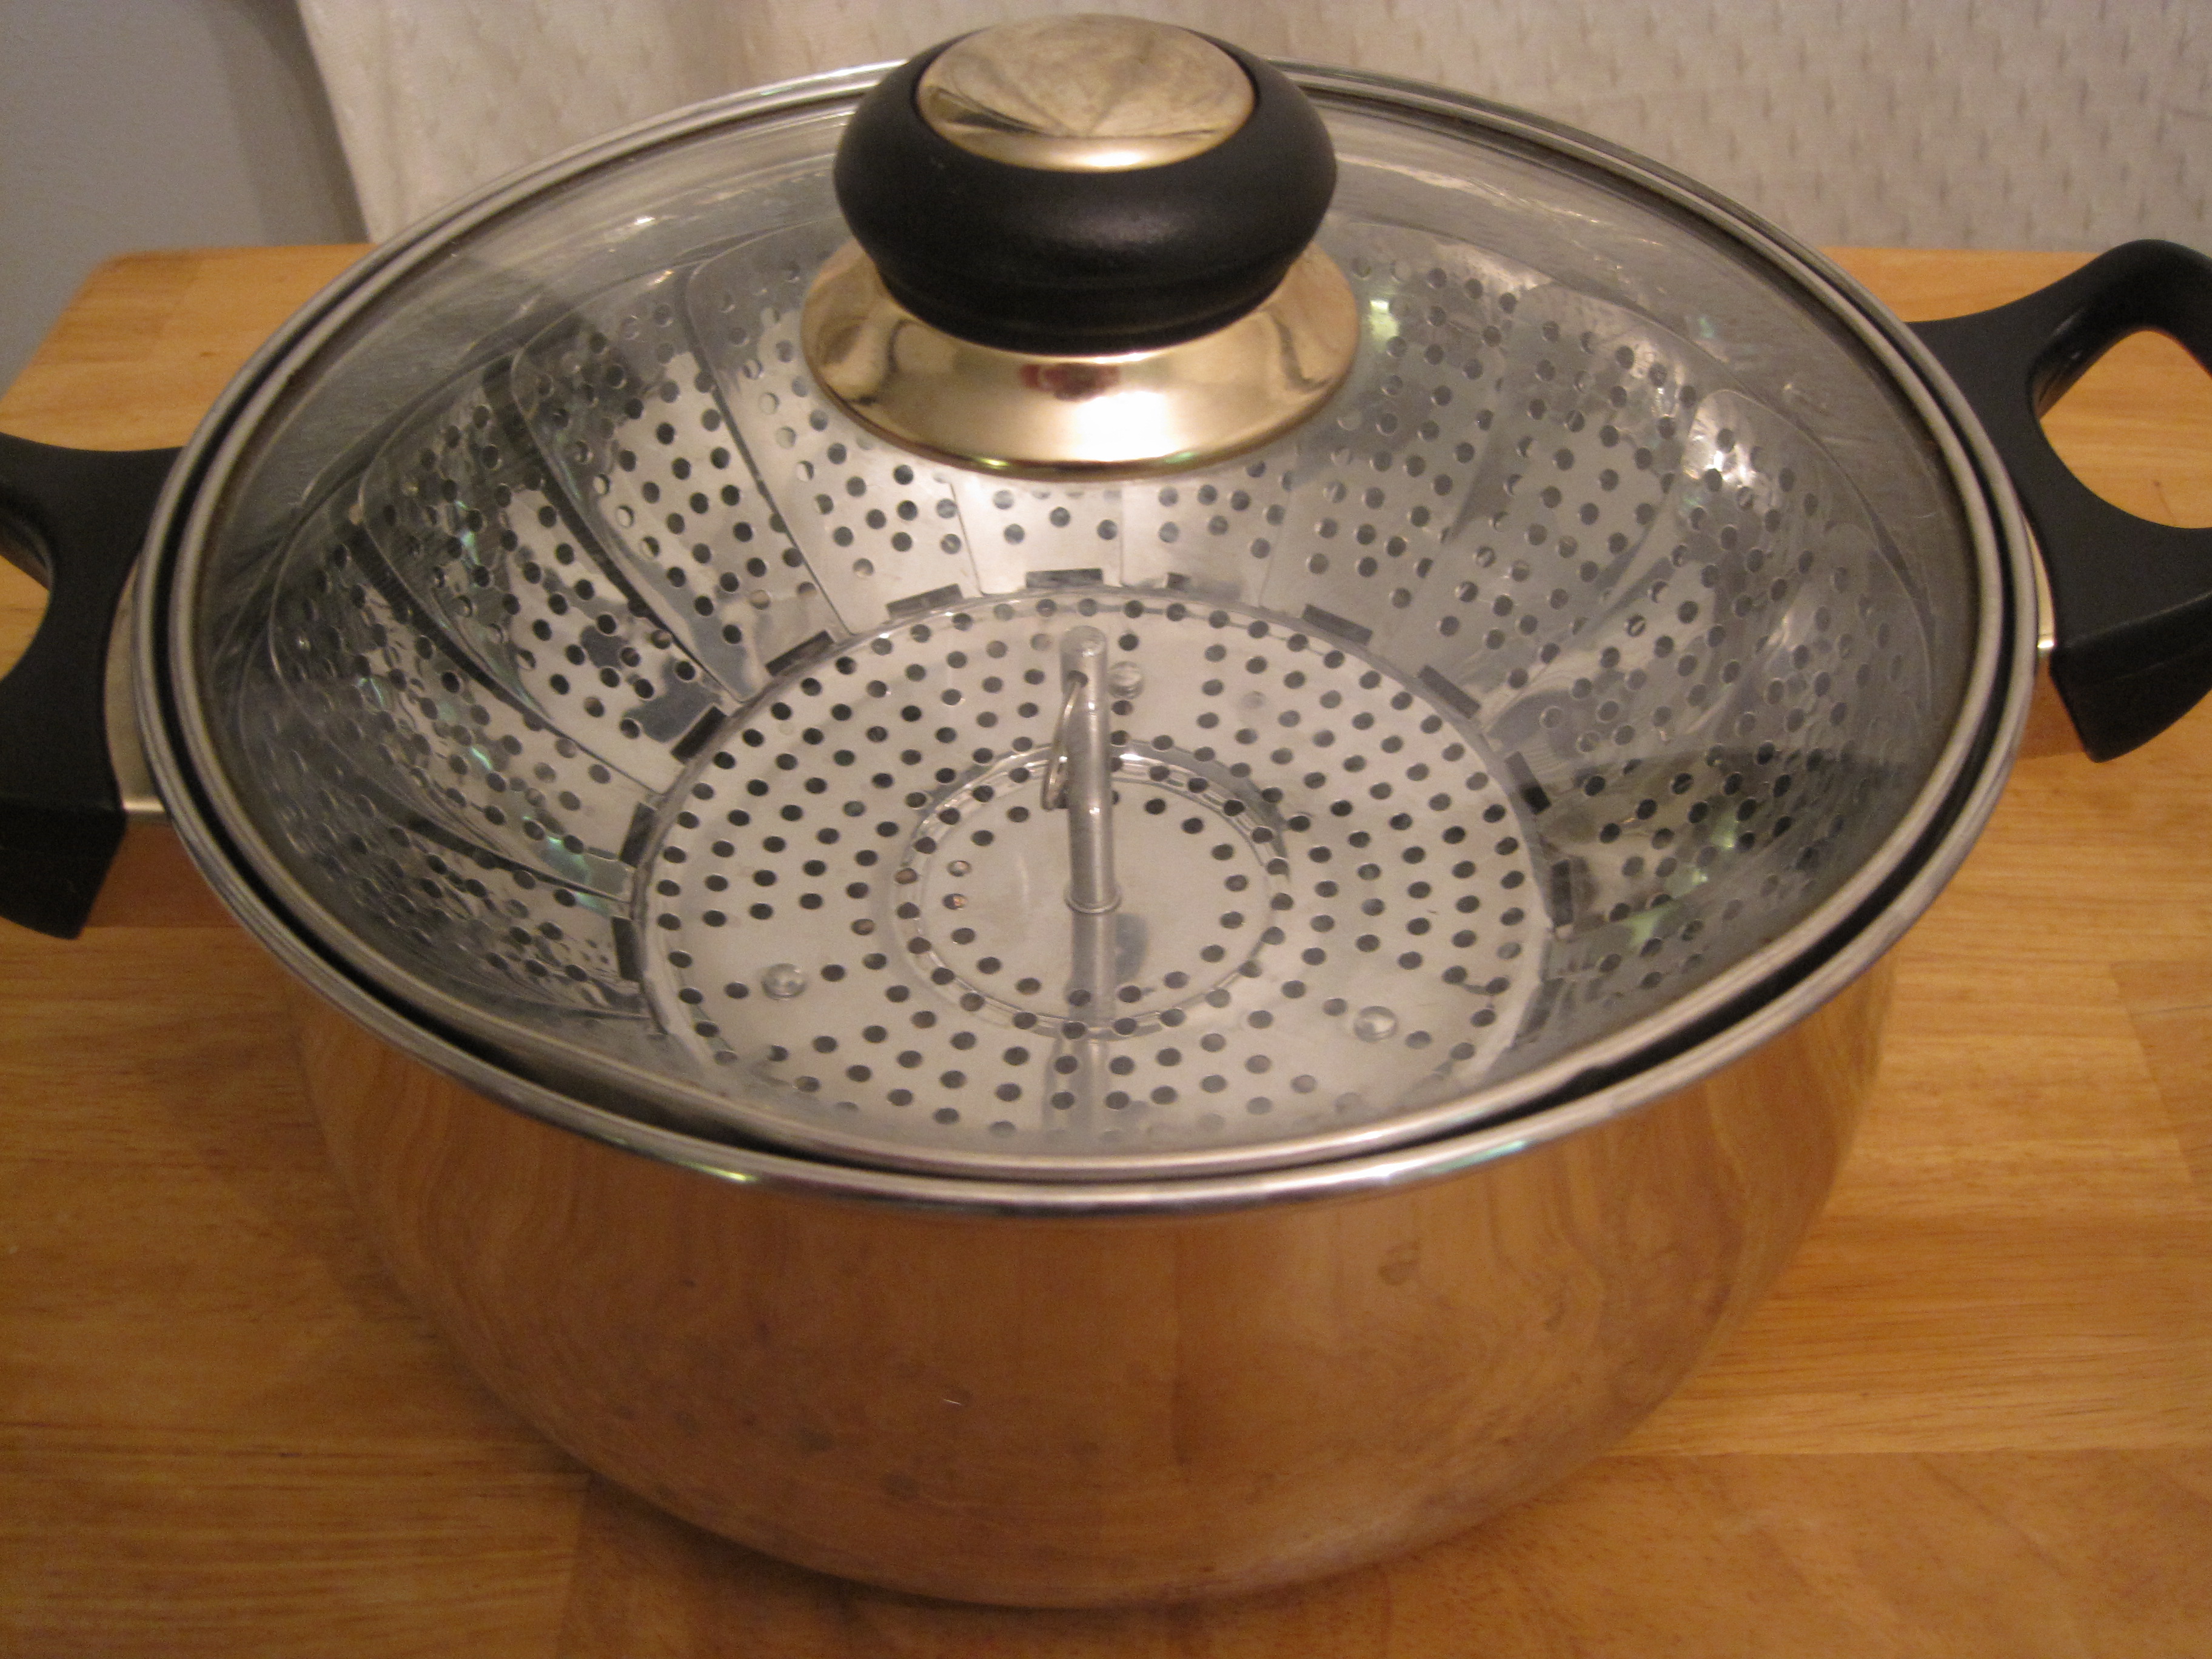 How to Steam Without a Steamer Basket, Cooking School